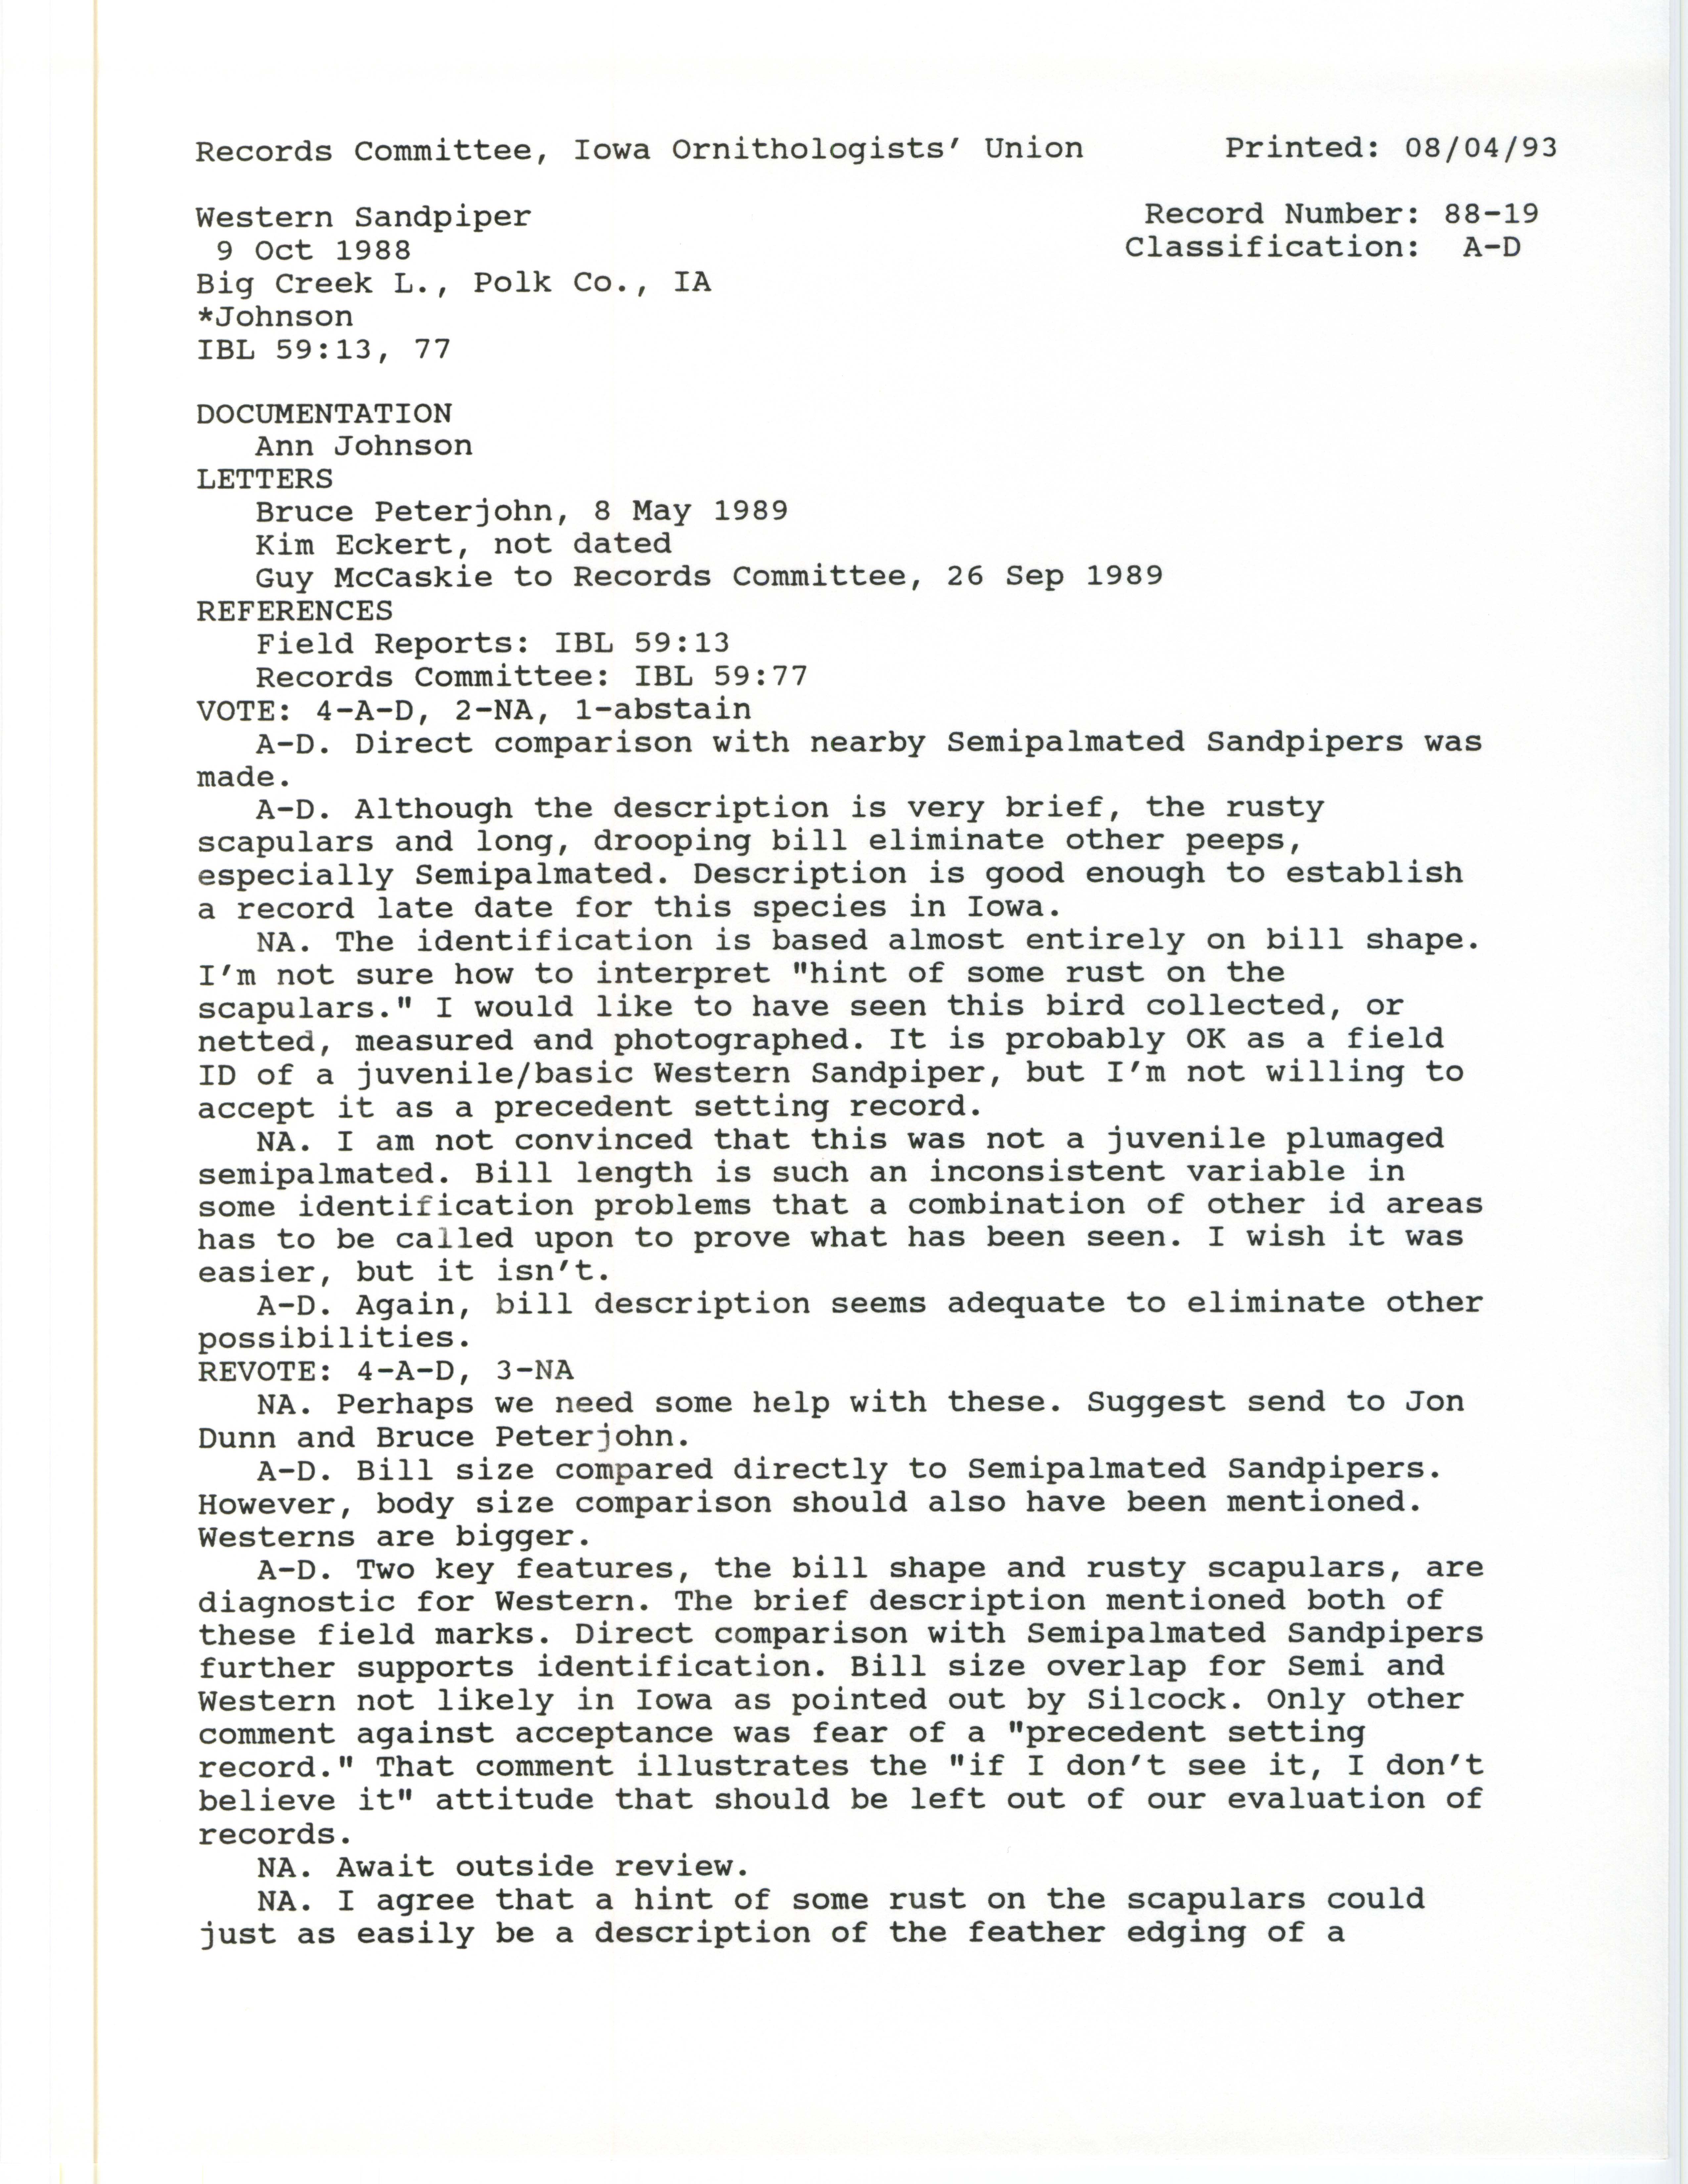 Records Committee review for rare bird sighting of Western Sandpiper at Big Creek Lake, 1988